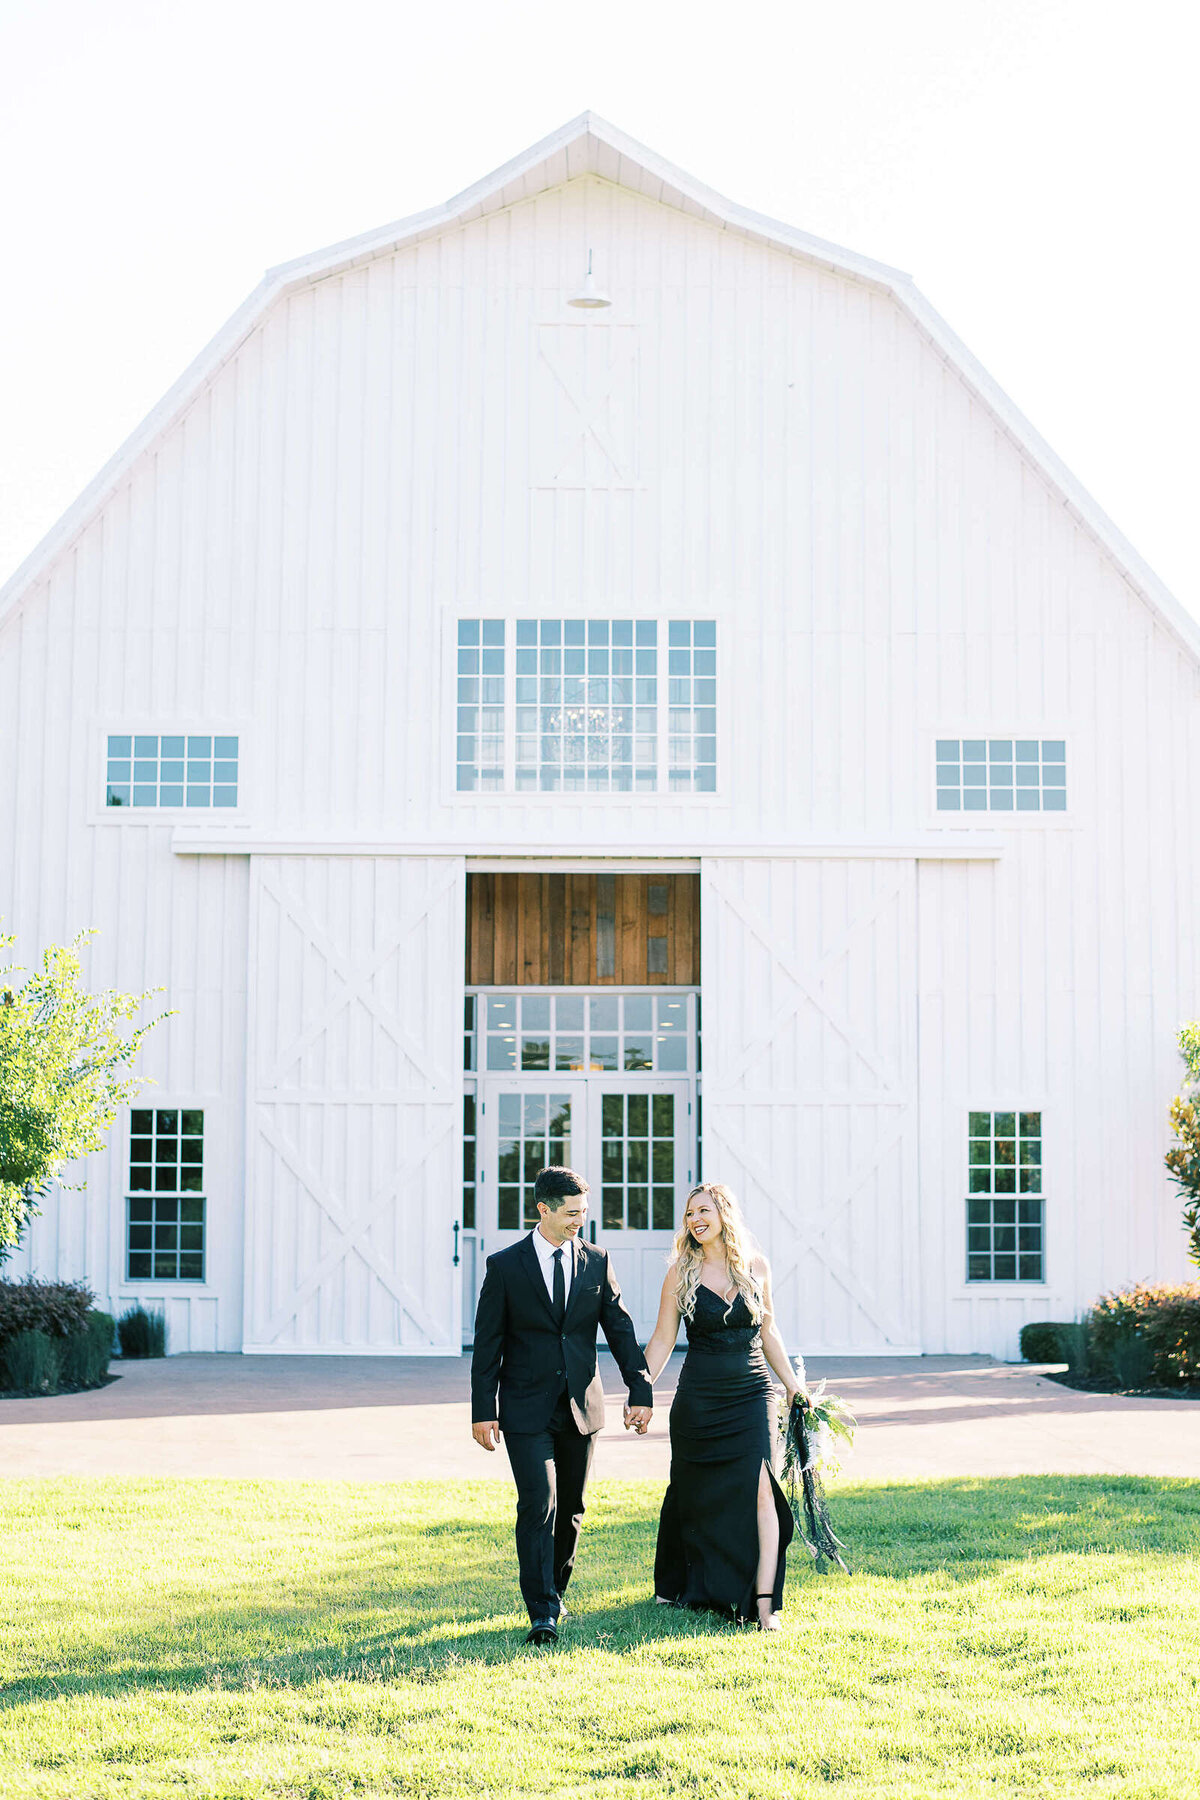 26 The White Sparrow Barn North Texas Engagement Kate Panza Photography Laura Lee and Justus